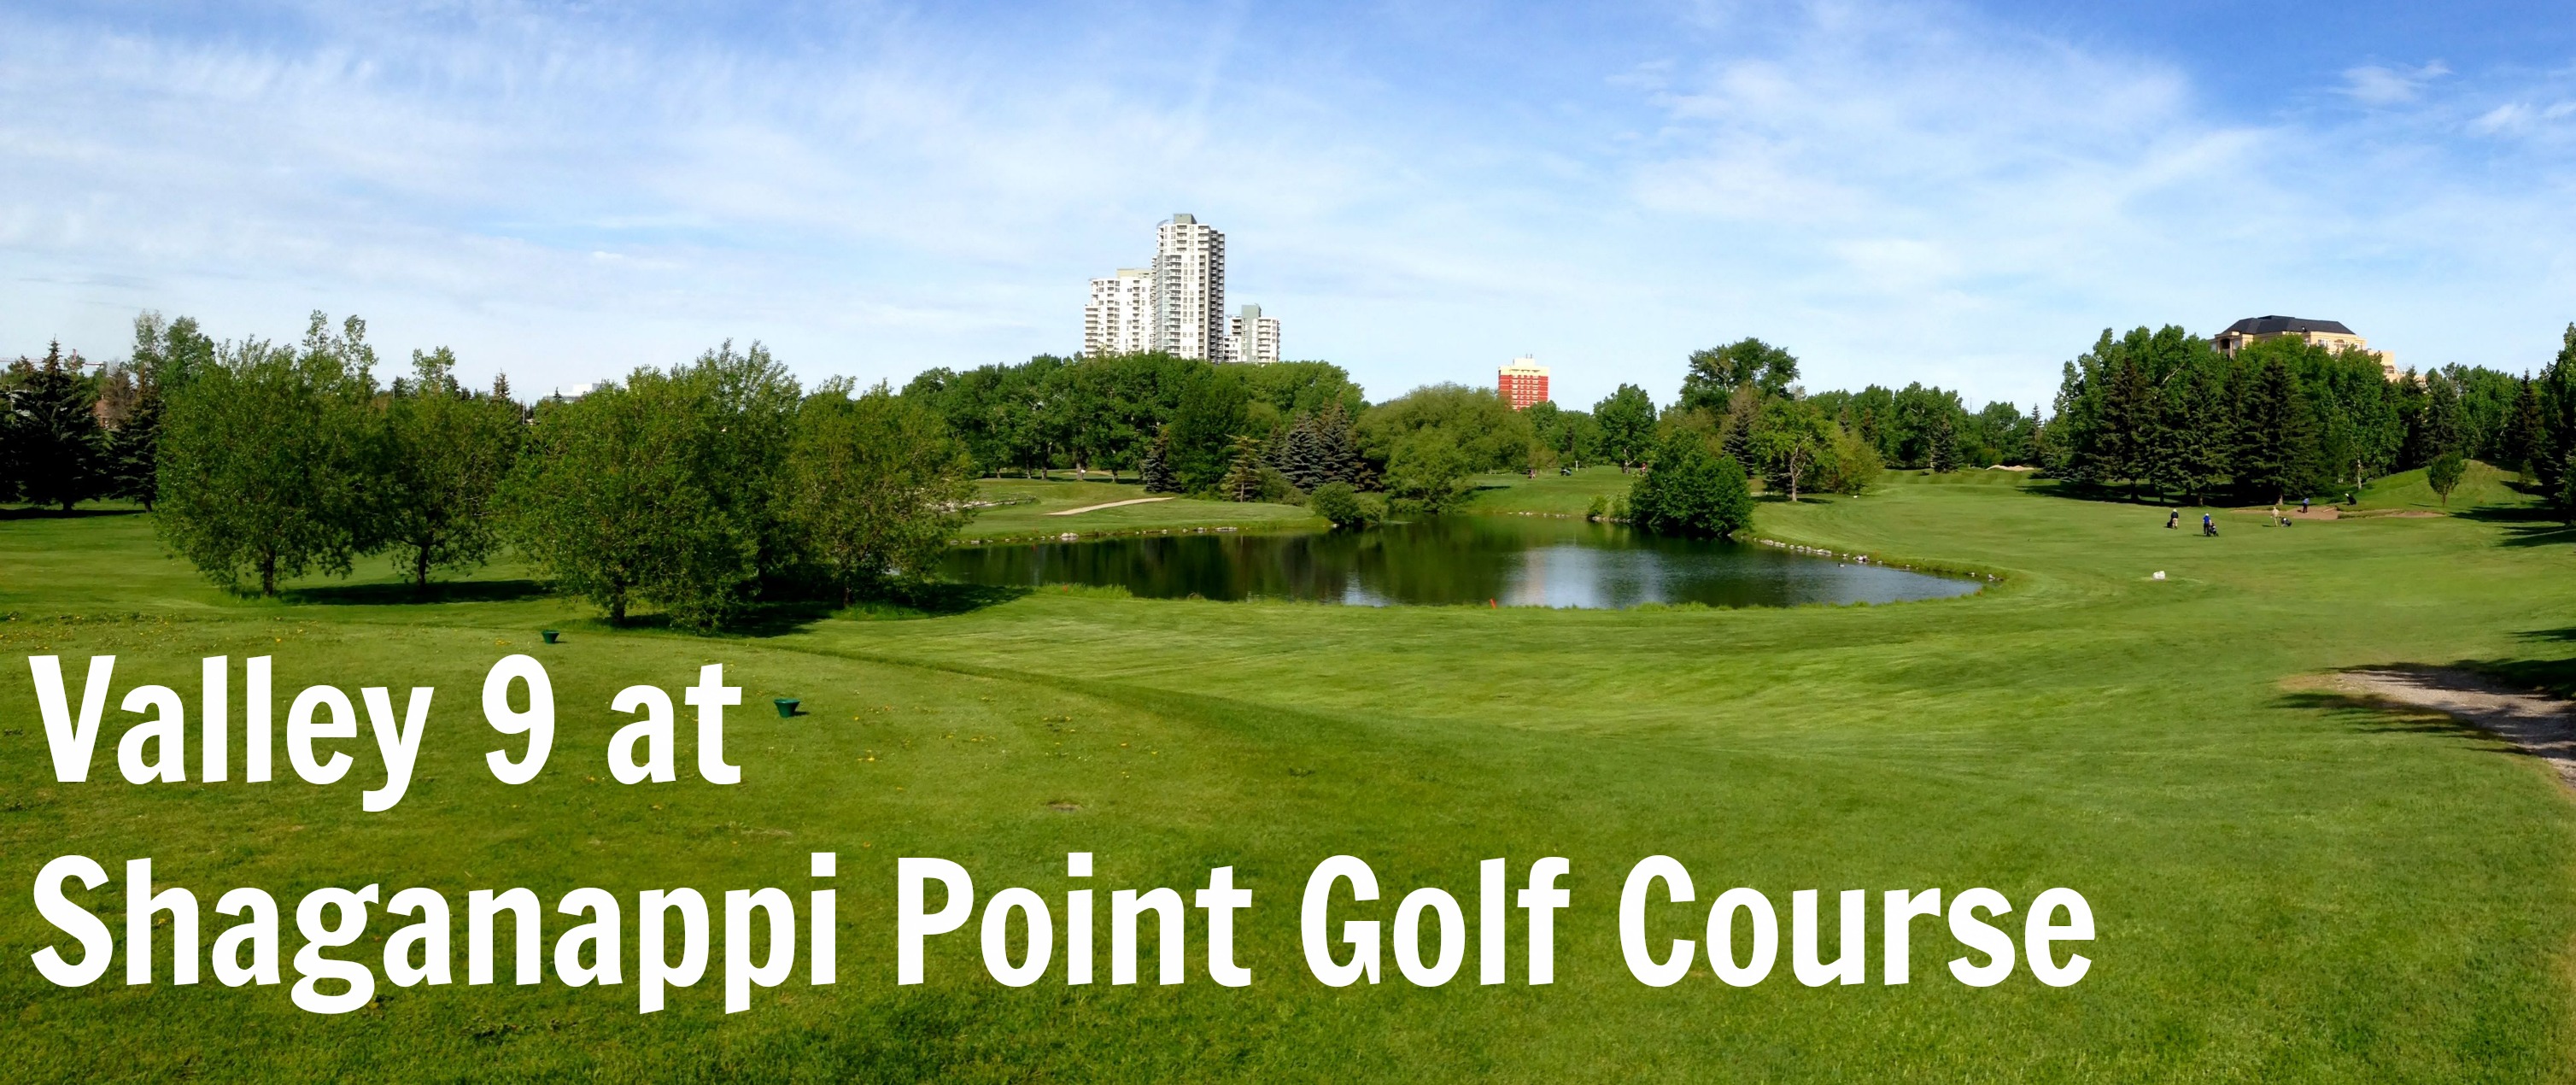 Shaganappi Point Golf Course Valley 9